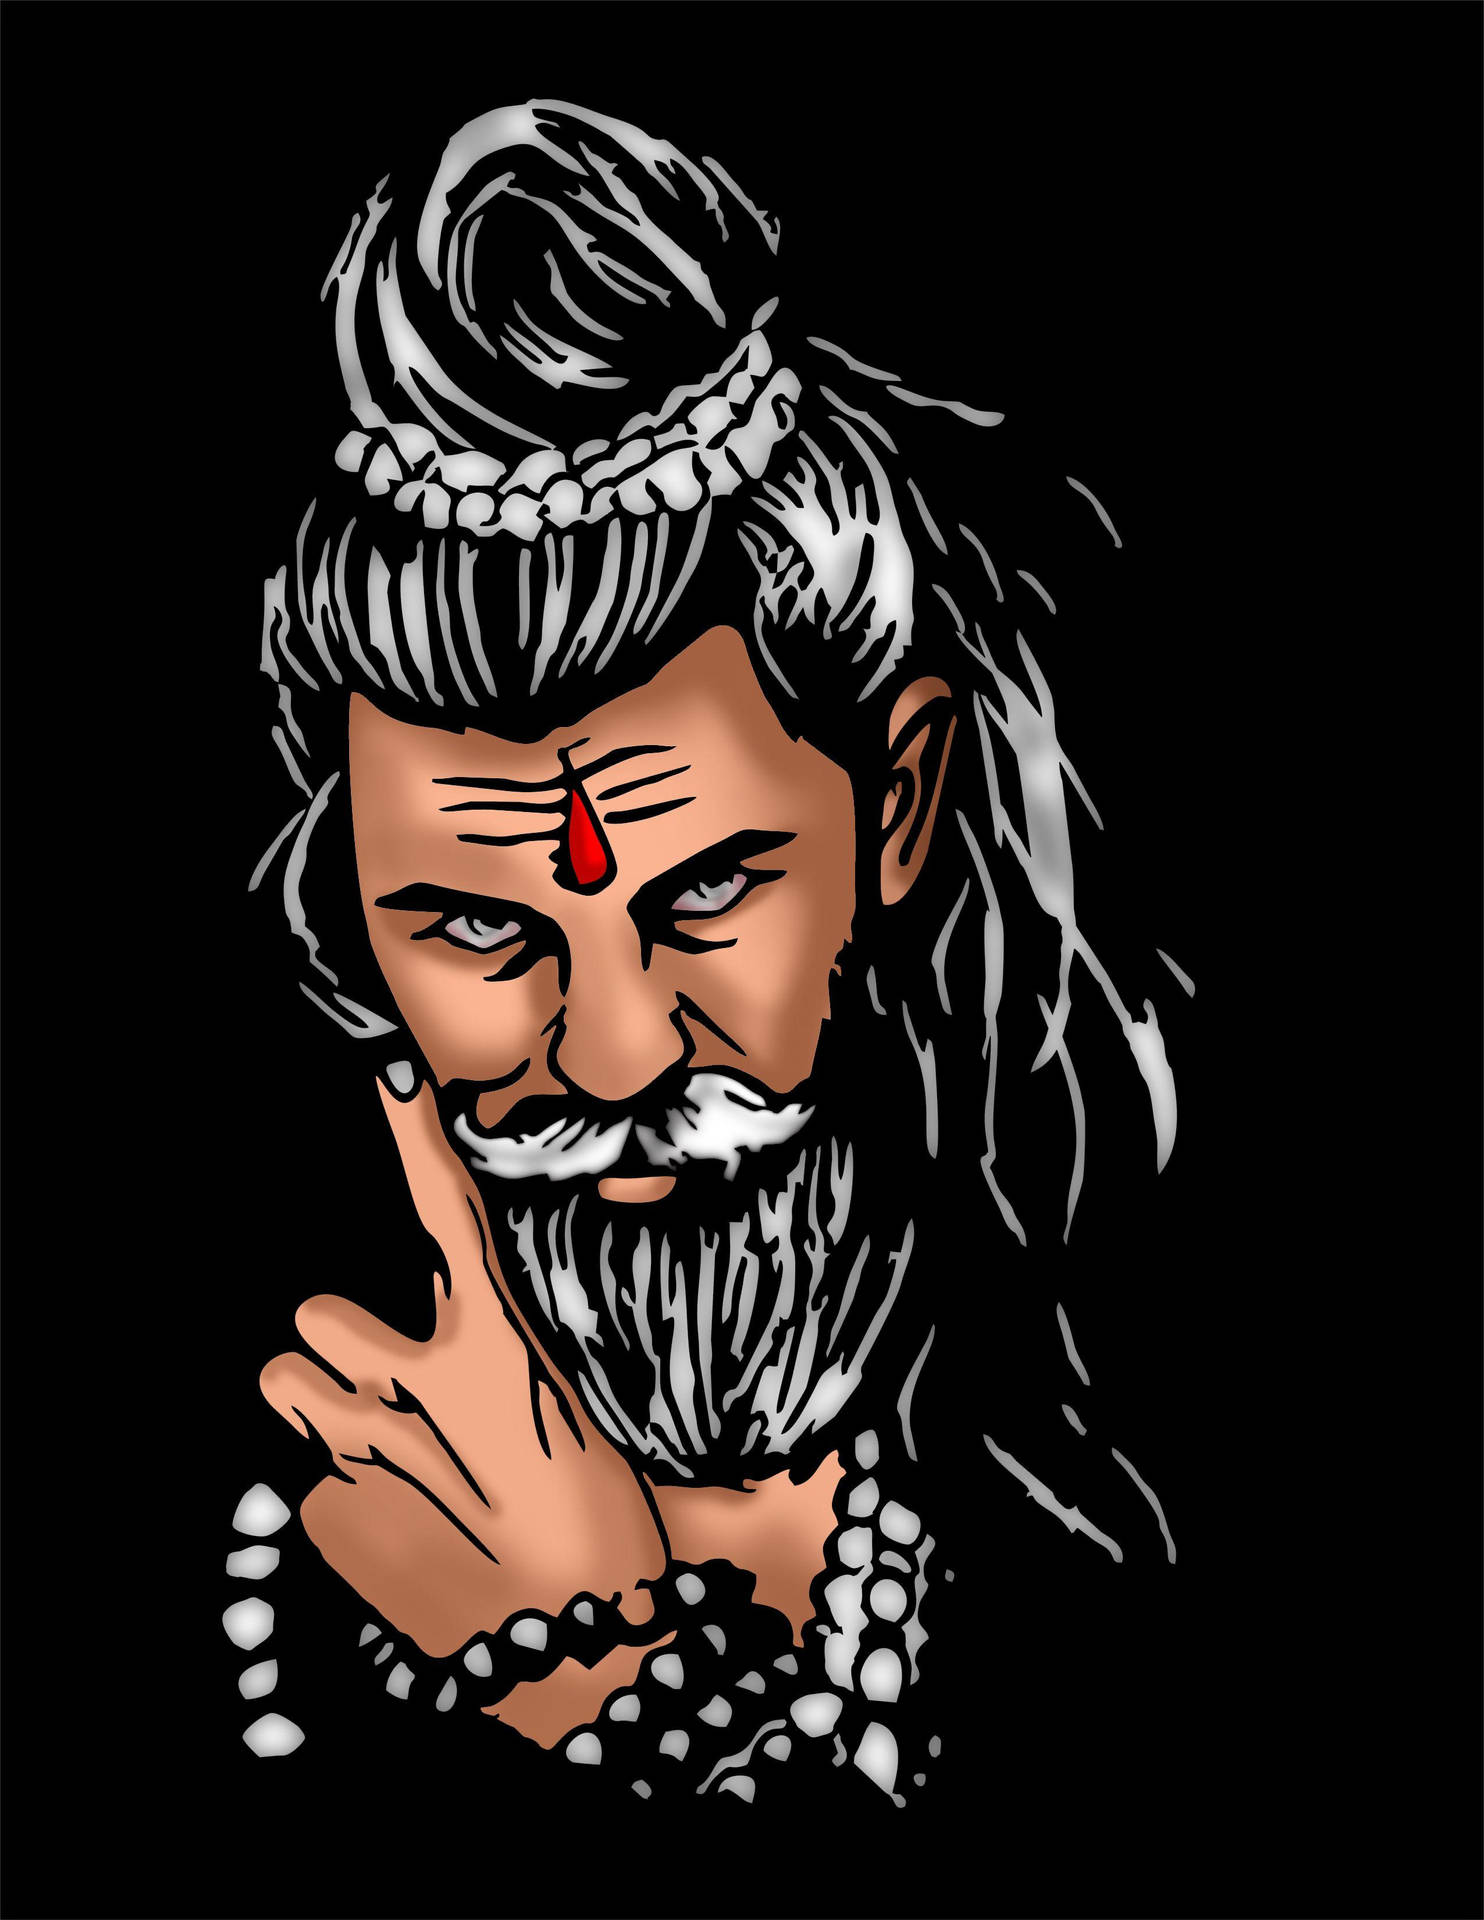 Mahakaal Painting On Black Hd Background